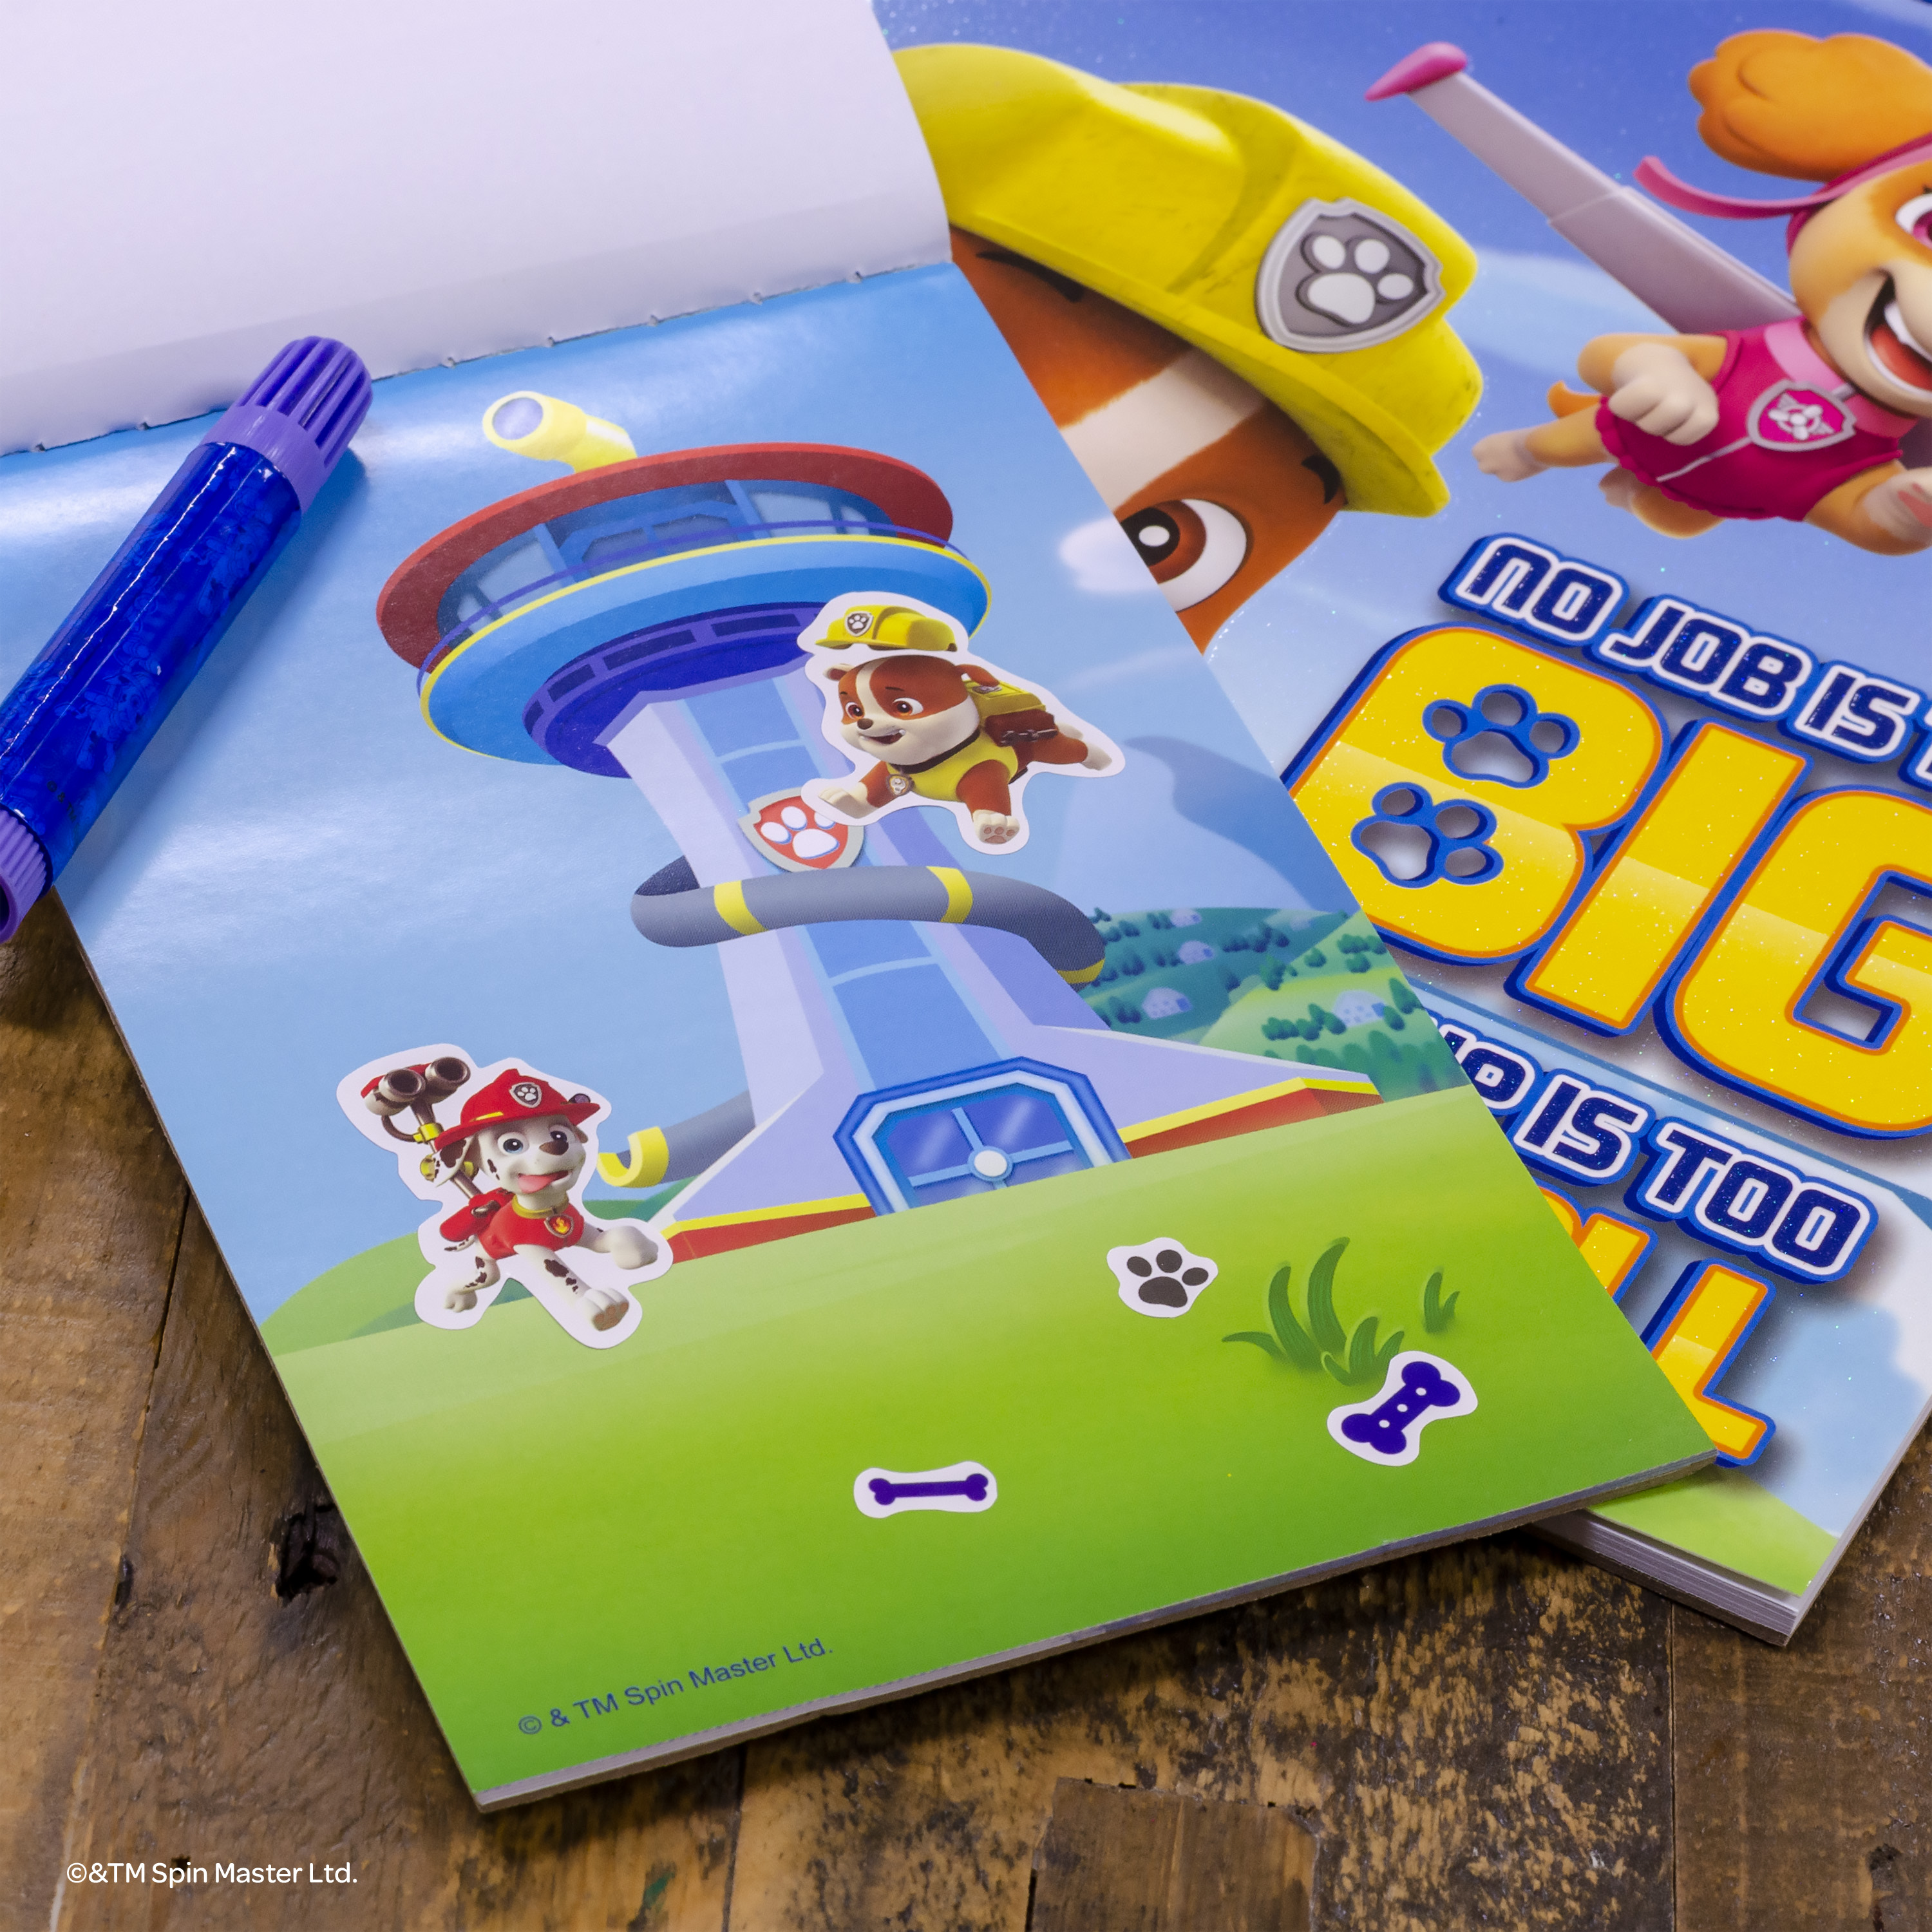 PAW Patrol World Of Art & Activity Kit with an Imagine Ink Book - image 7 of 8